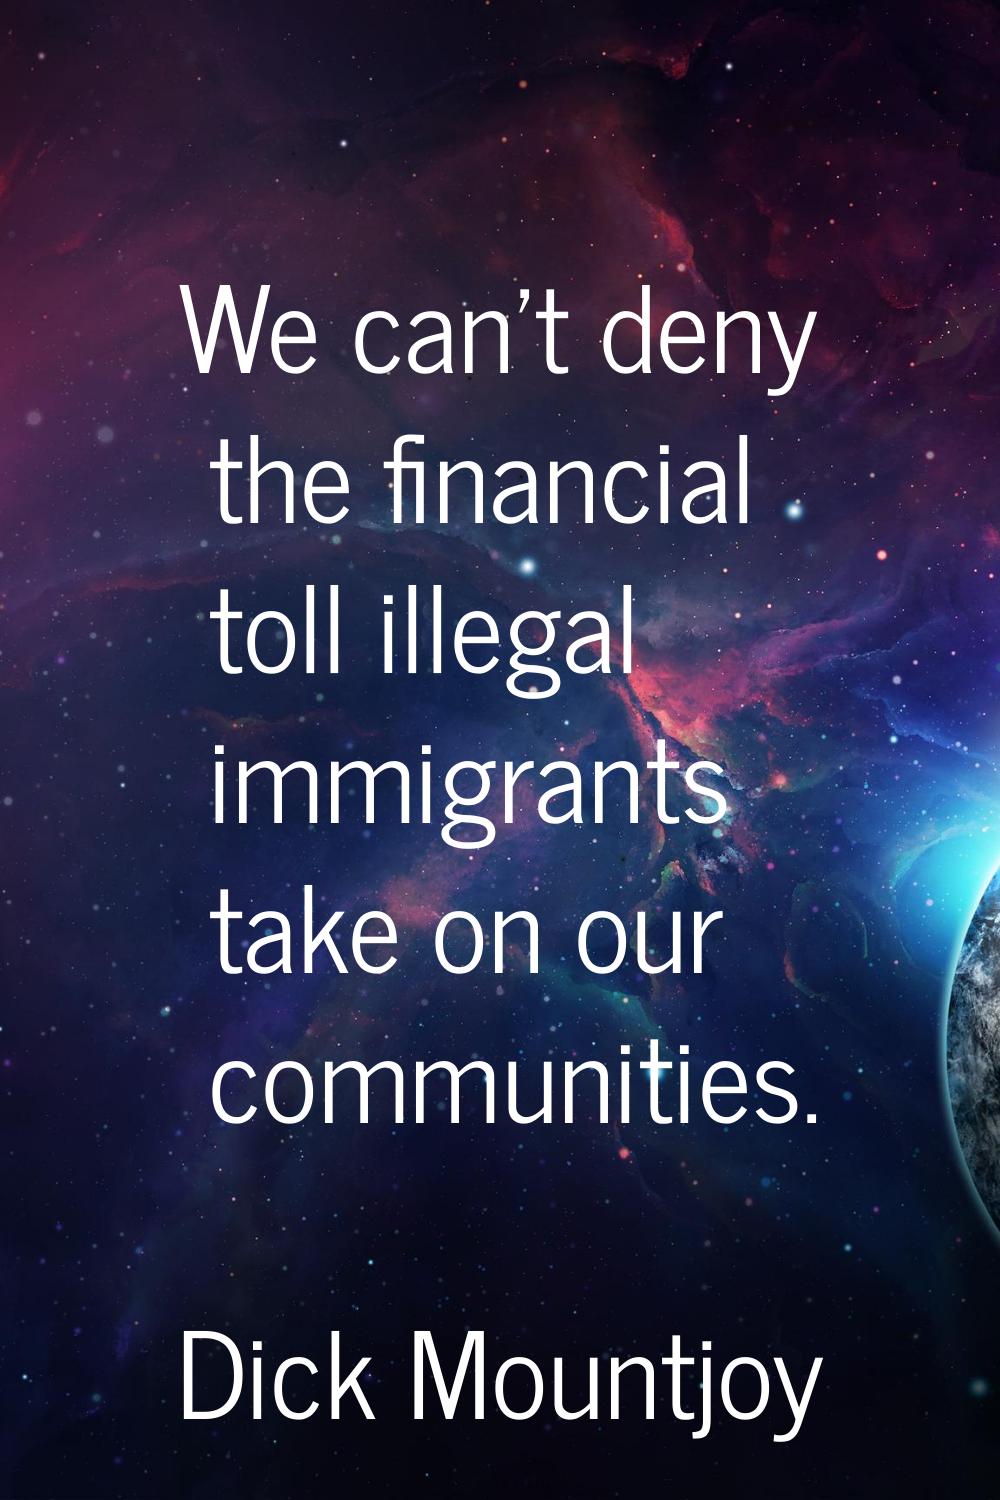 We can't deny the financial toll illegal immigrants take on our communities.